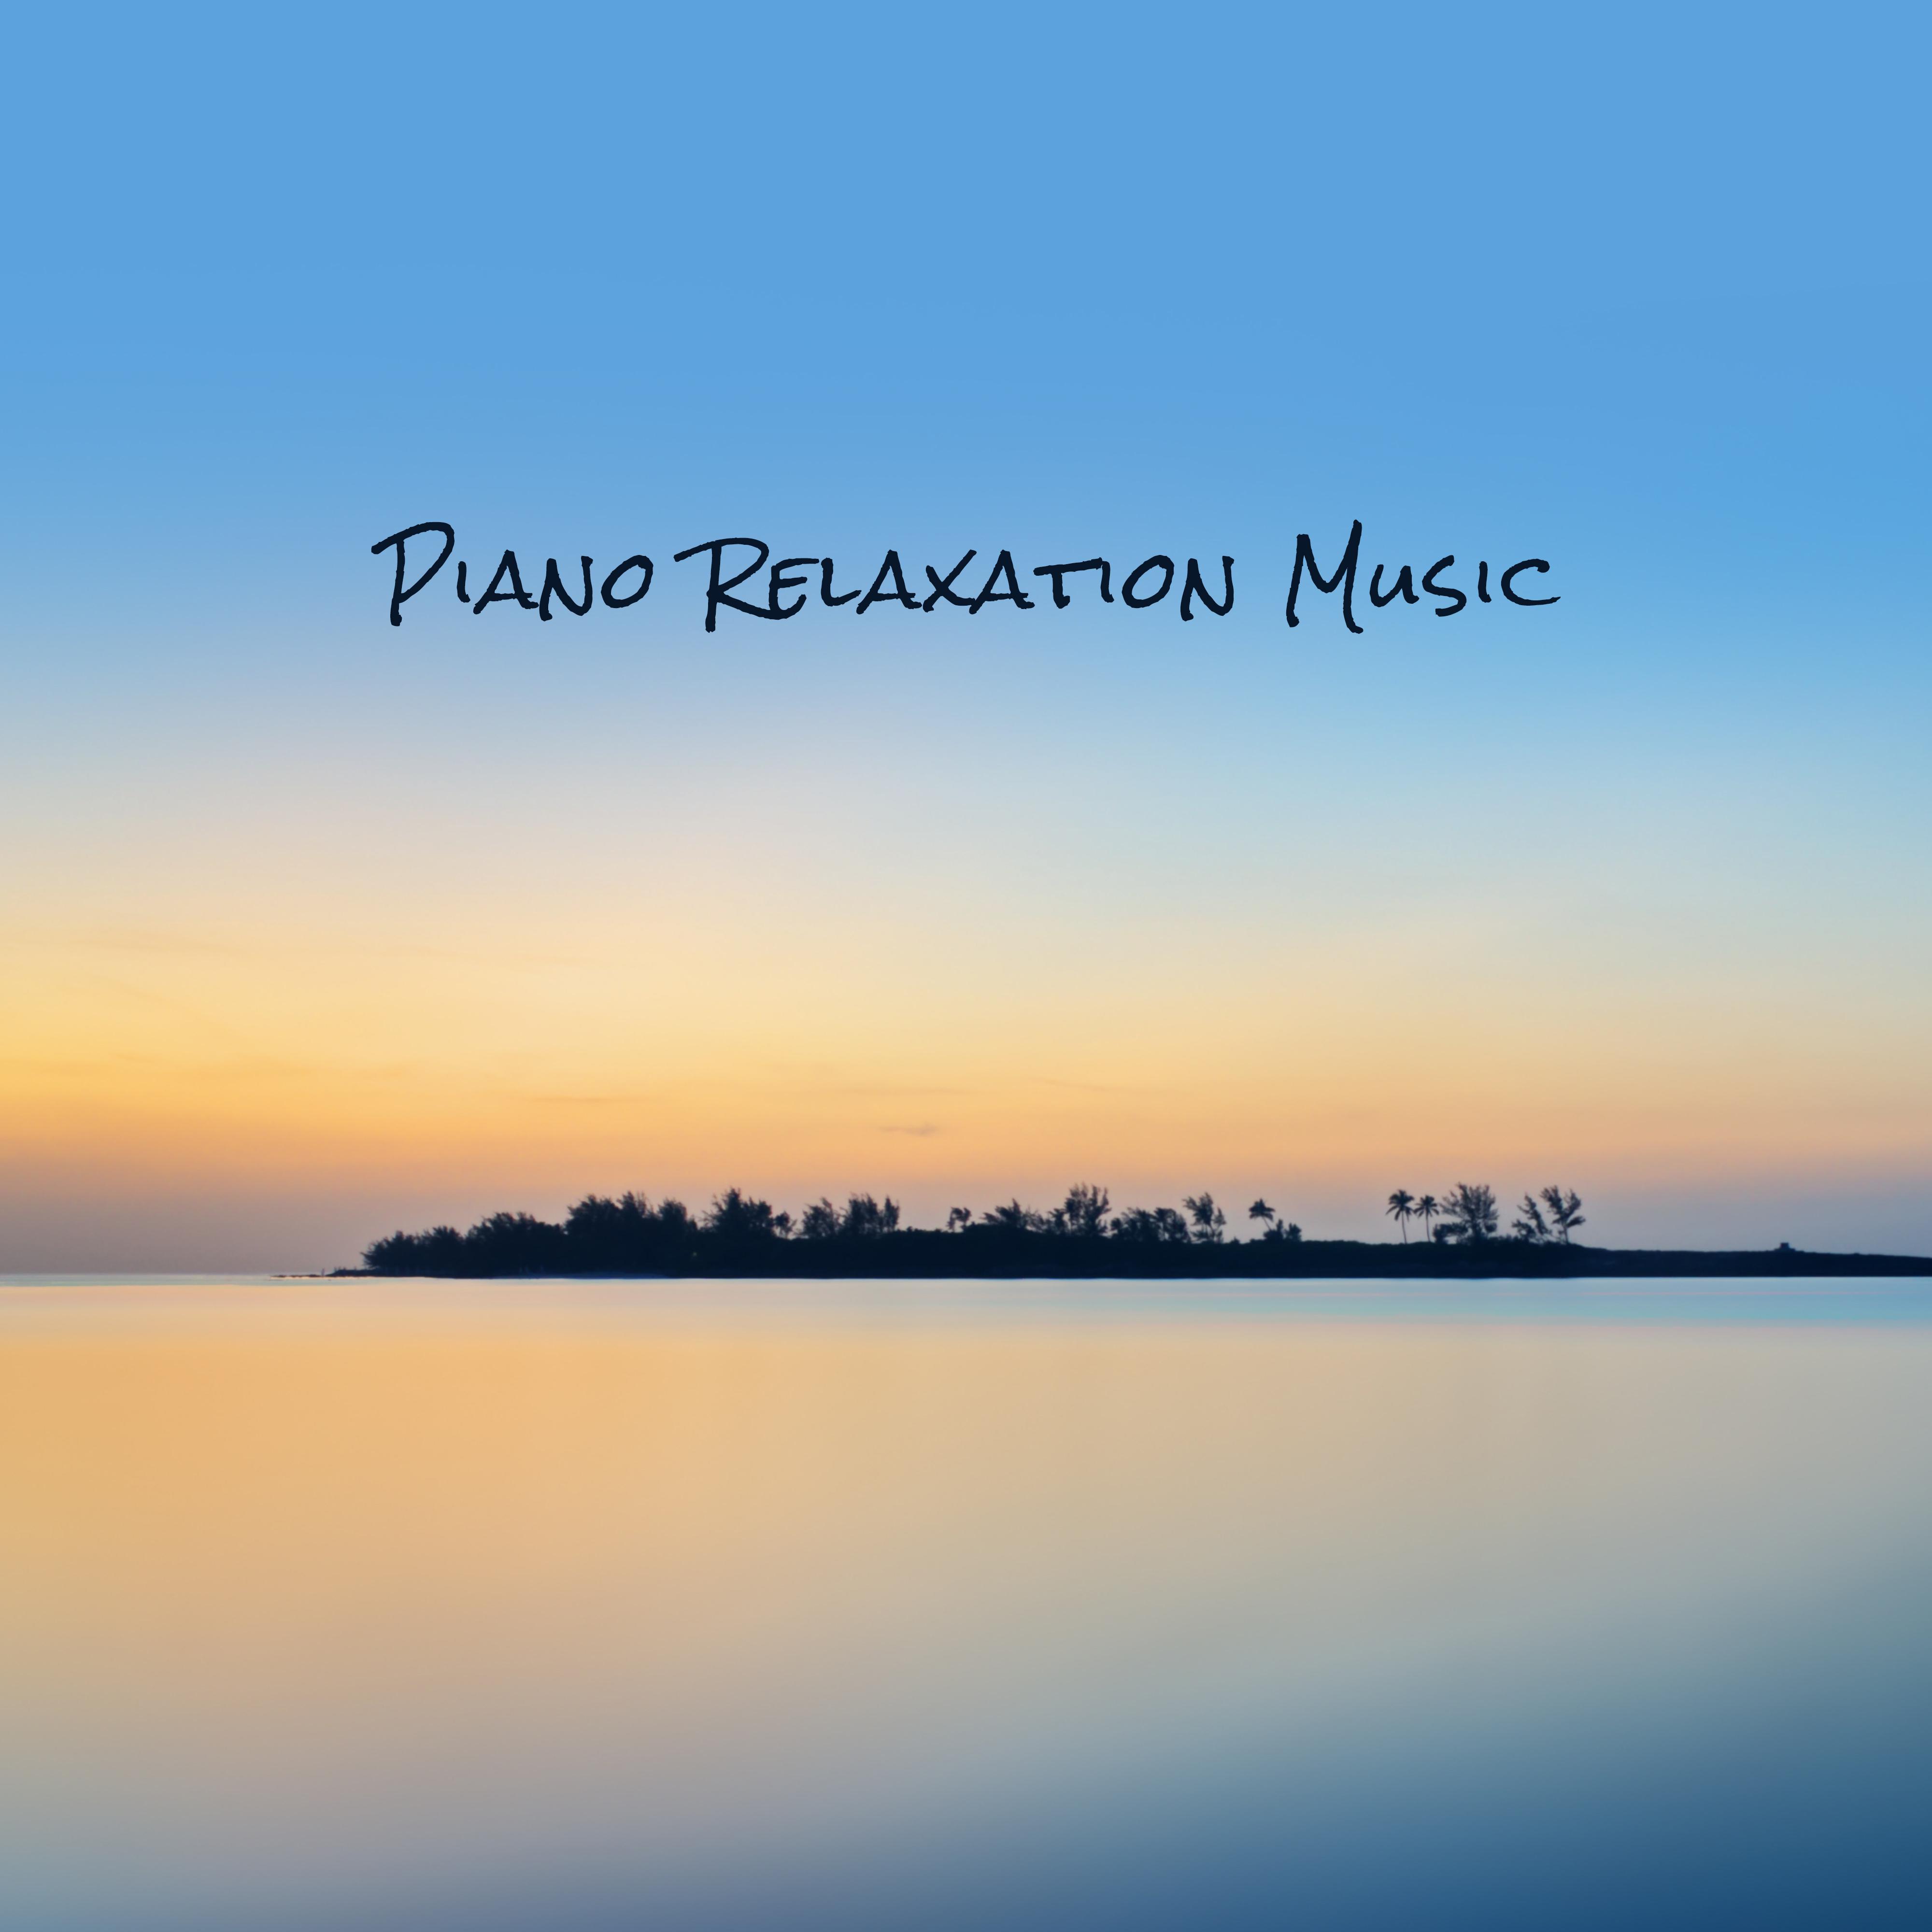 Piano Relaxation Music - 15 Music Compositions to Rest, Calm Down, Relax, Stress Relief and Deep Reassure